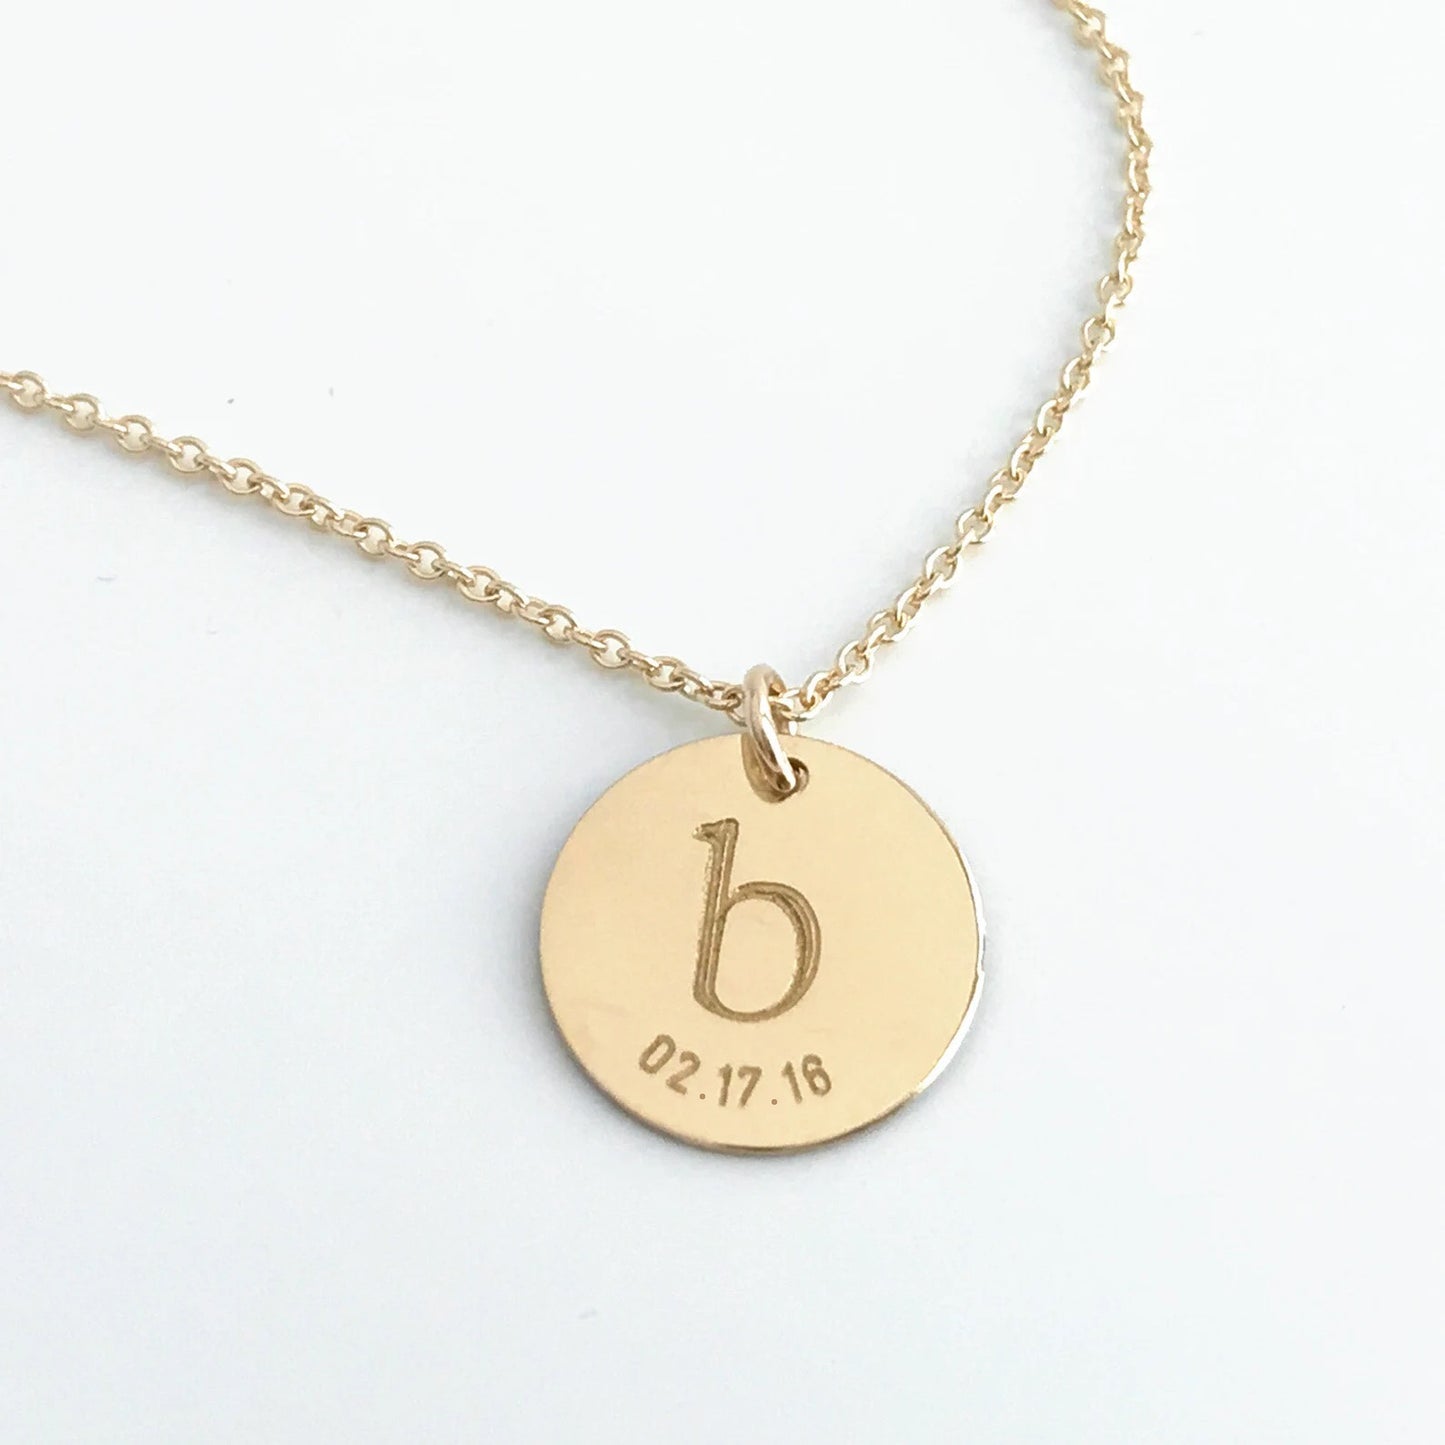 Personalized Initial and Date Disc Necklace